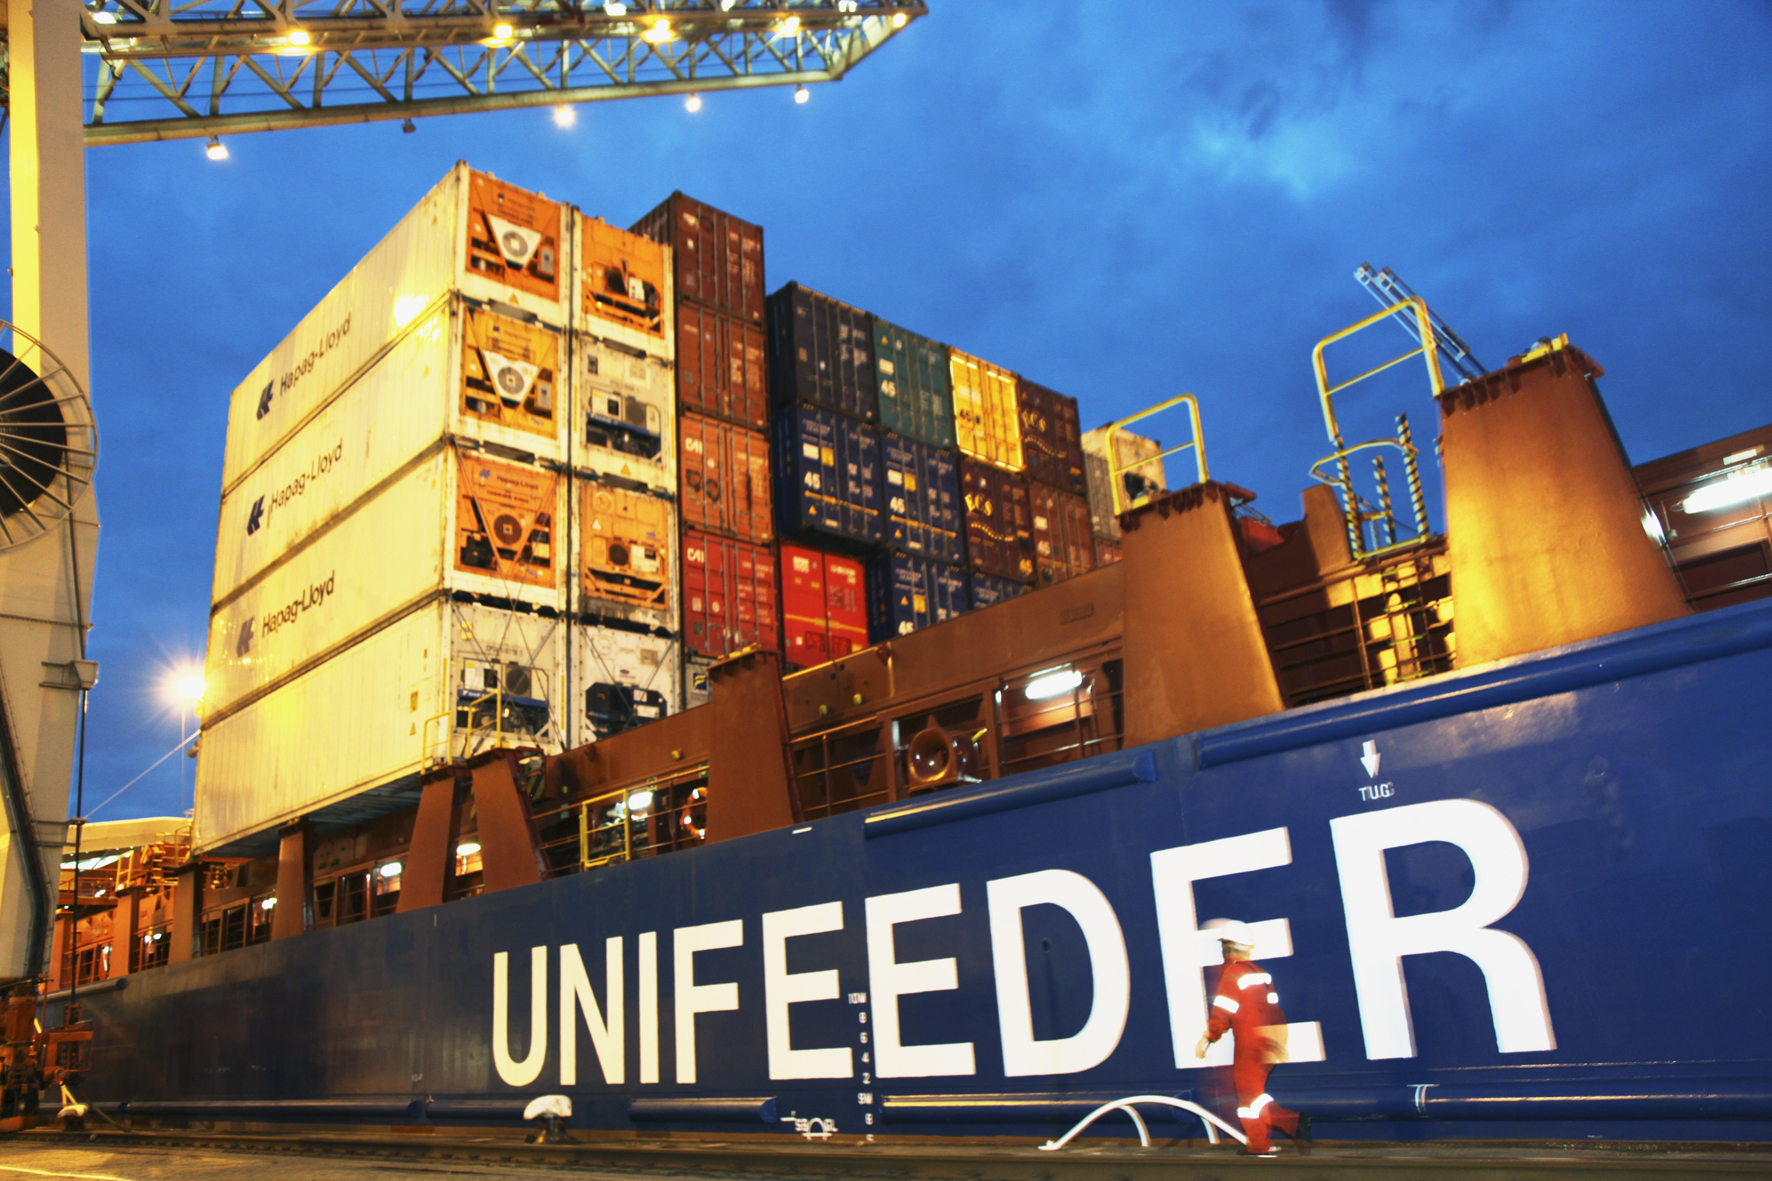 Unifeeder Contract We4Sea For Fleetwide Vessel Performance Monitoring